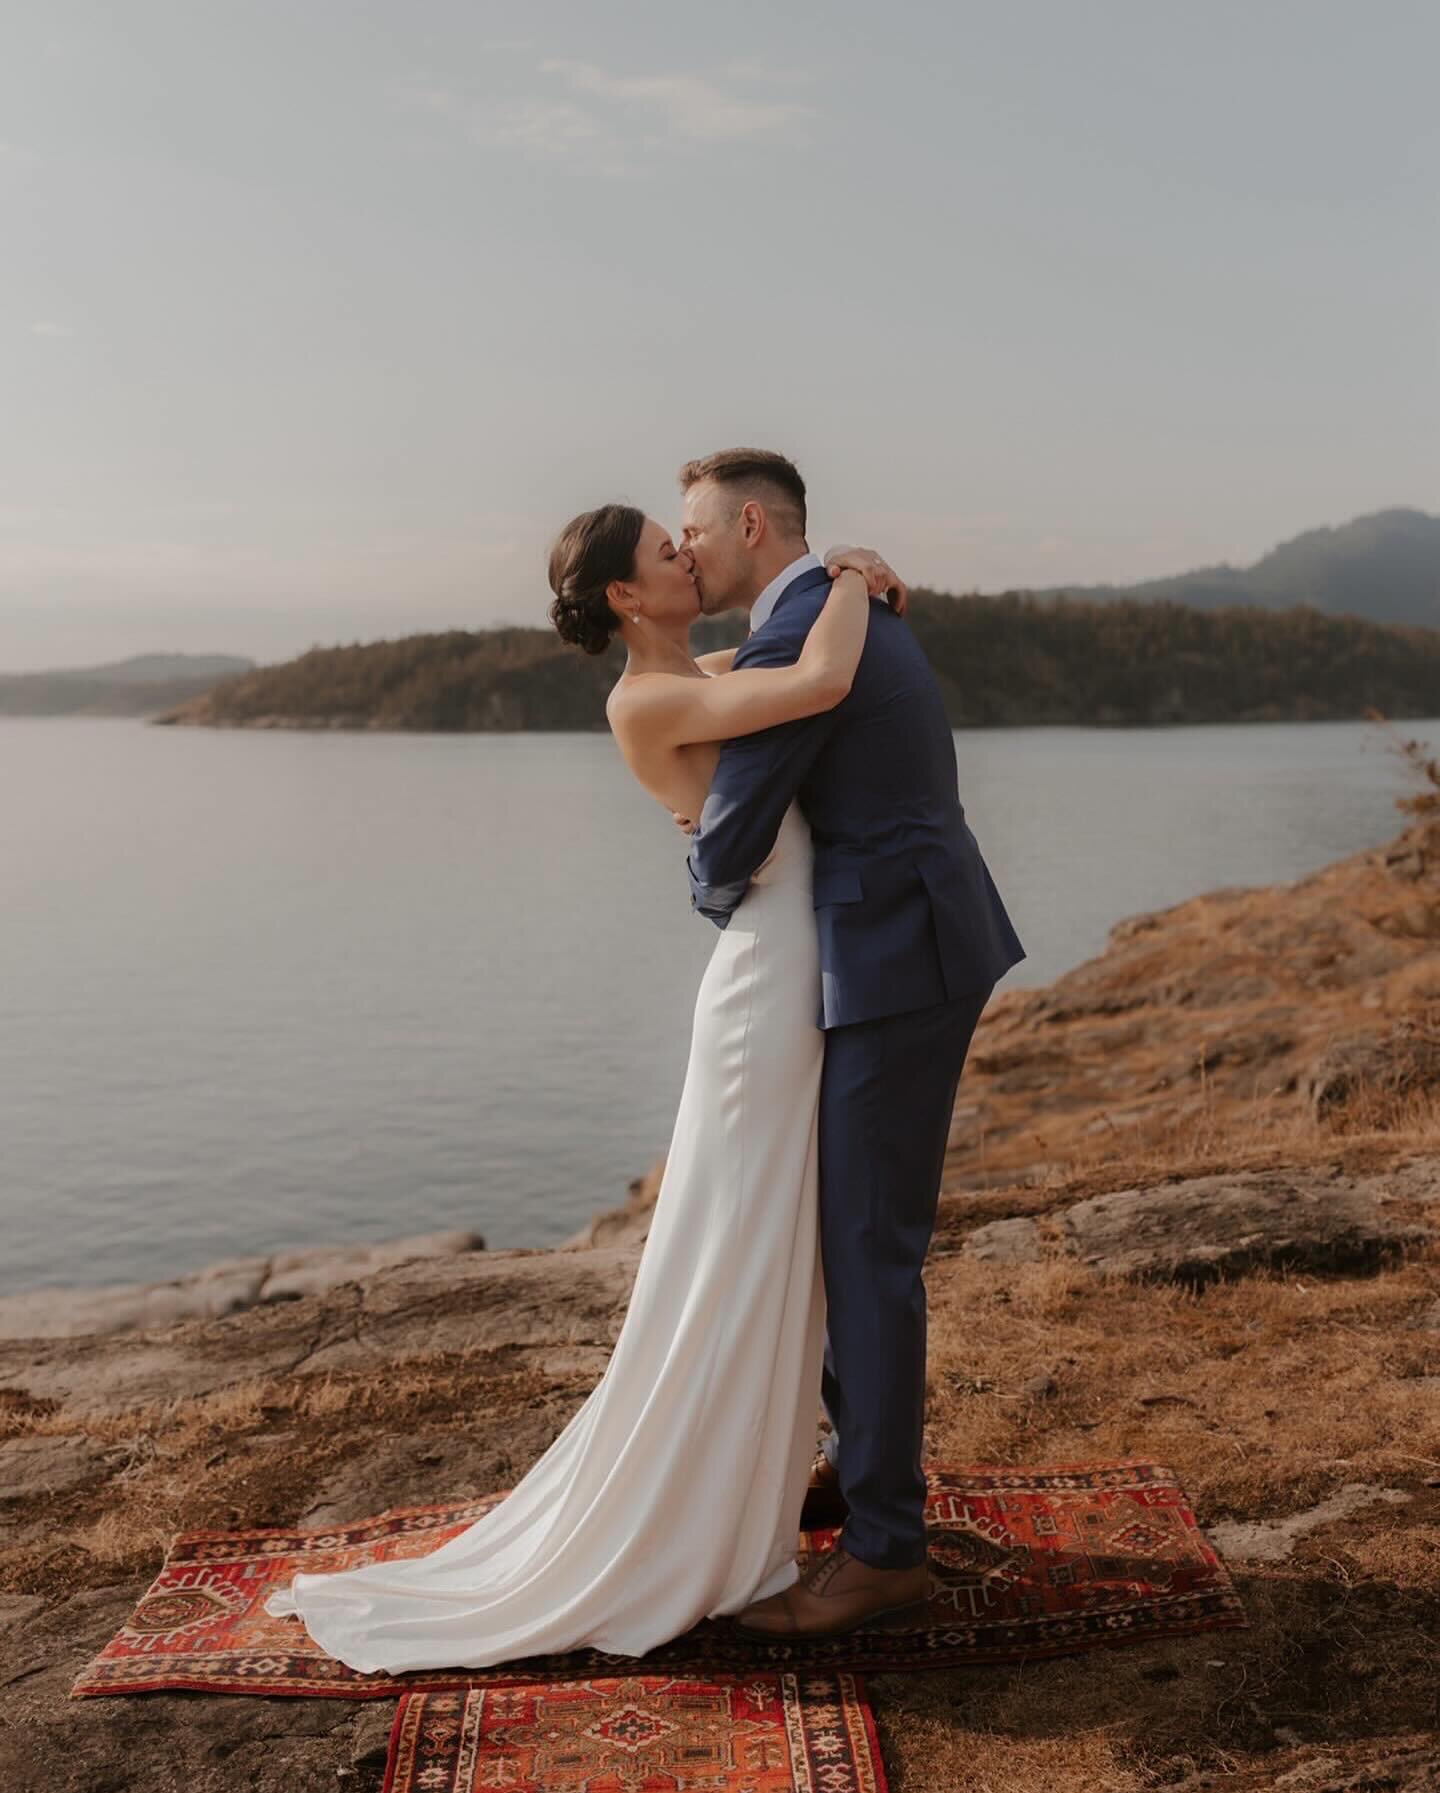 An emotional and joy-filled intimate ceremony with Pam + Sam and their loved ones on a cliffside overlooking the sparkling ocean. They were greeted right before their first kiss with a pod of orcas making it even more emotional and magical! ✨ The per